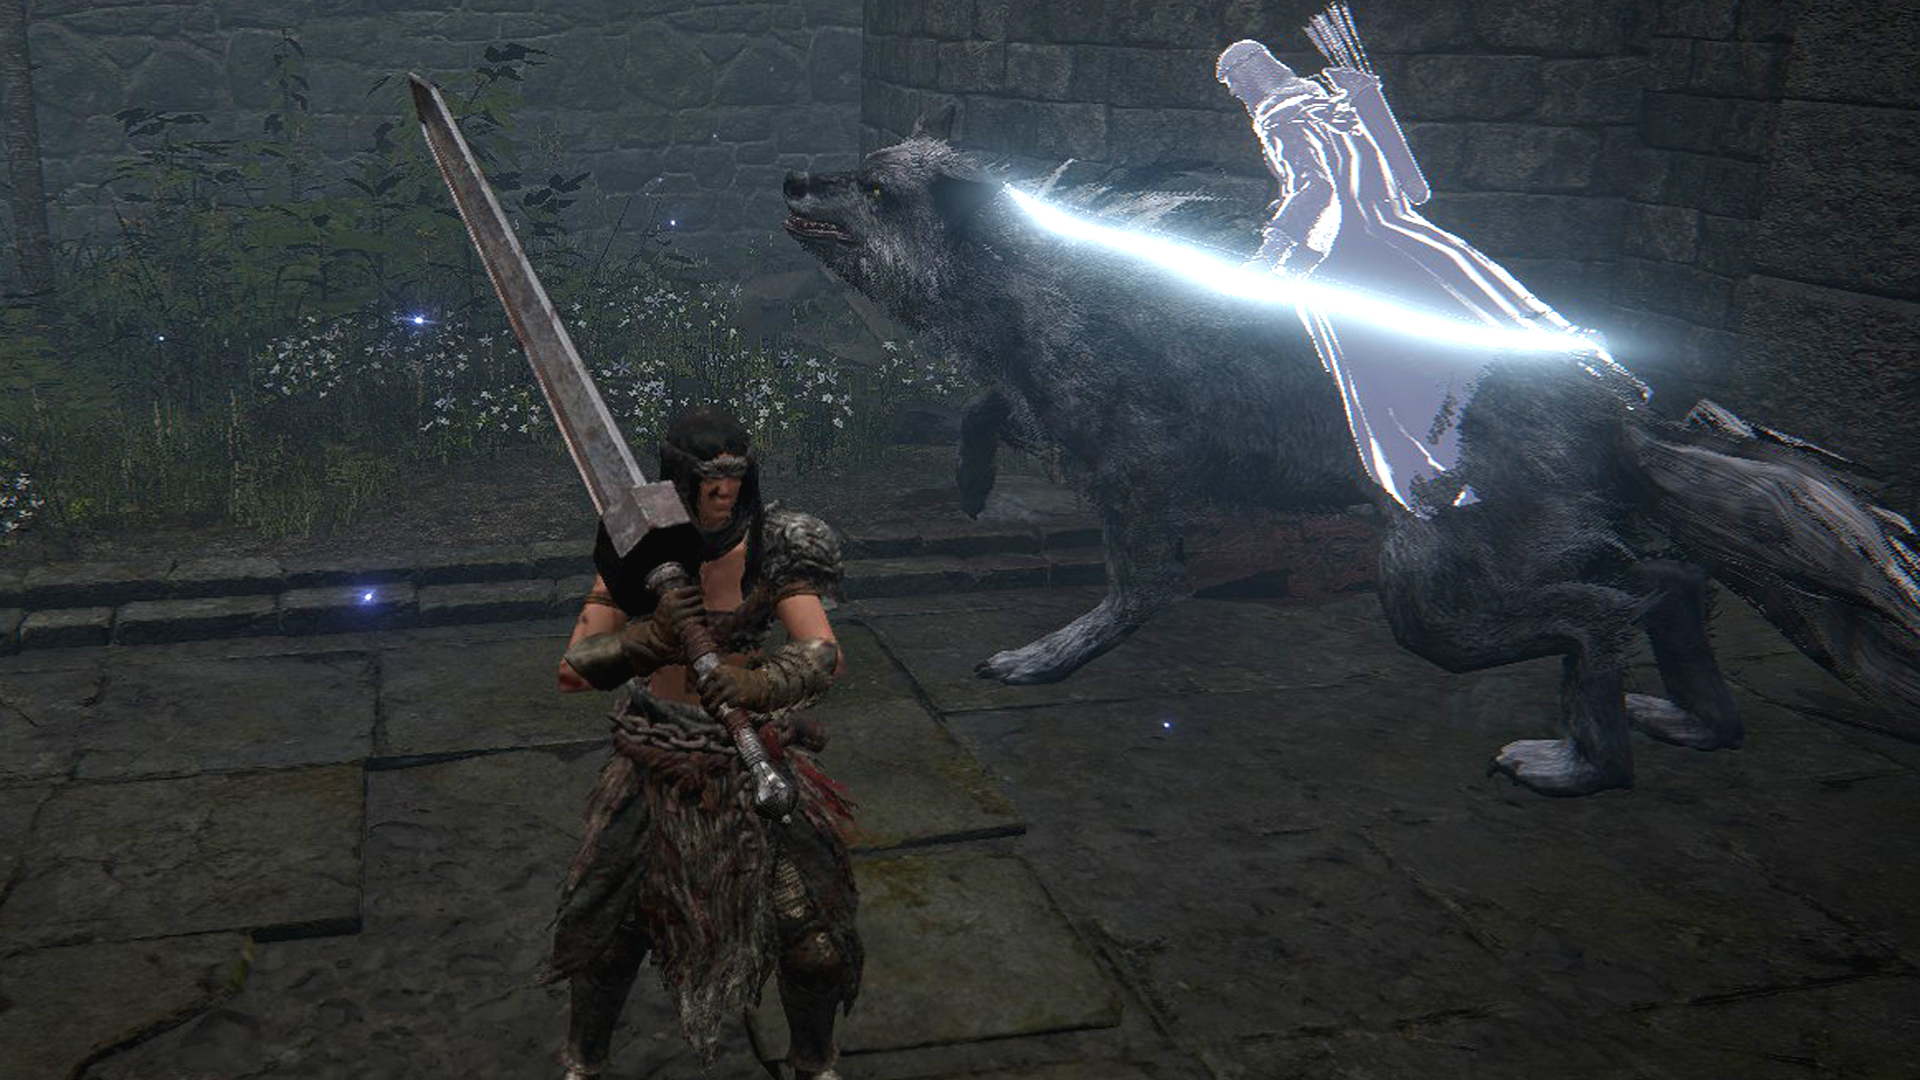 This Elden Ring summon can ride a wolf